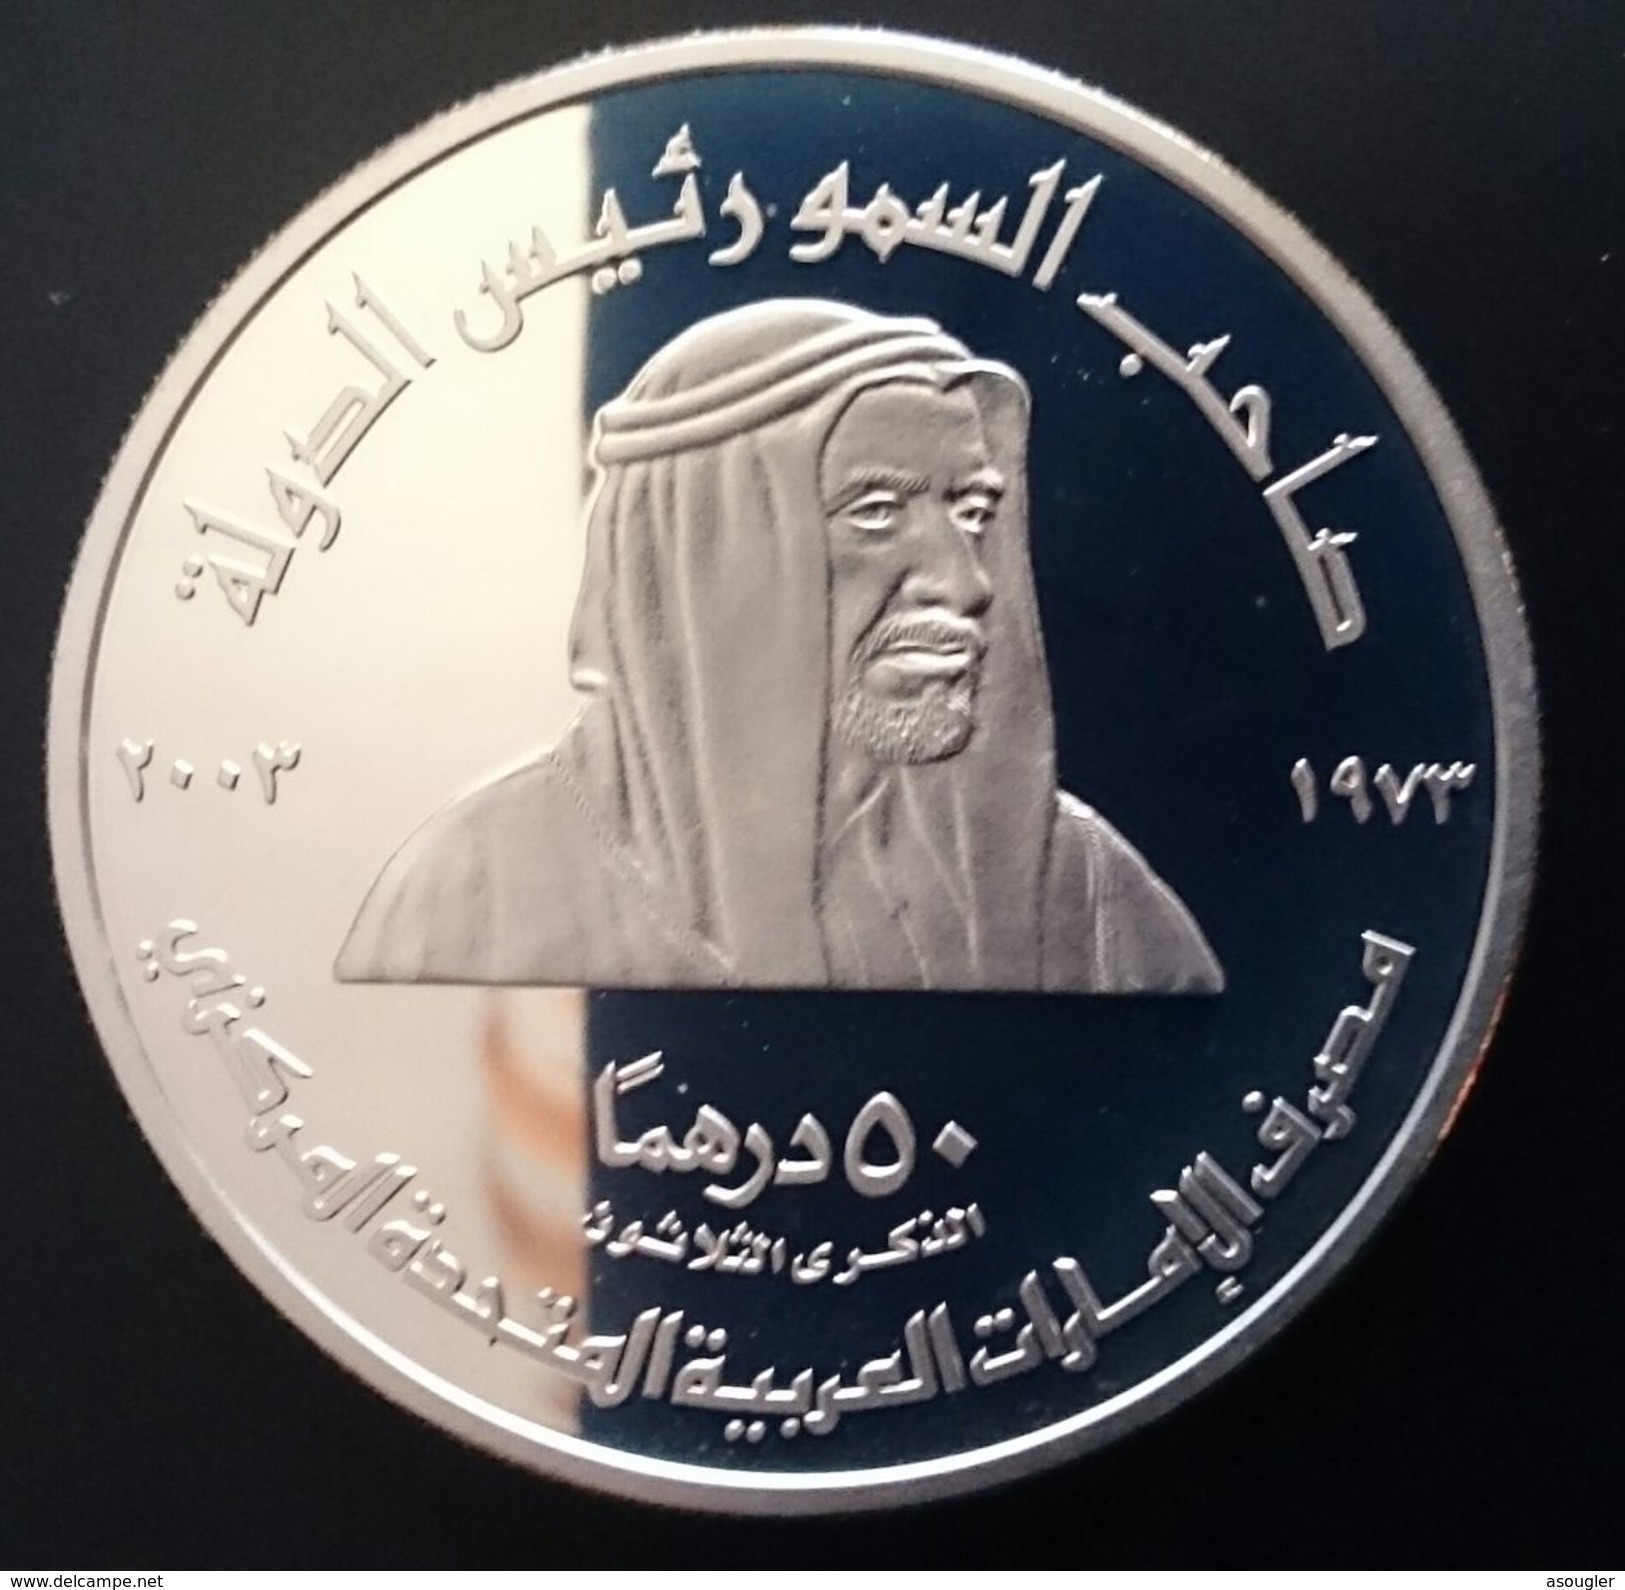 United Arab Emirates 50 DIRHAMS 2003 Silver Proof "U.A.E. Central Bank, 30th Anniversary" (free Shipping Via Registered) - Ver. Arab. Emirate